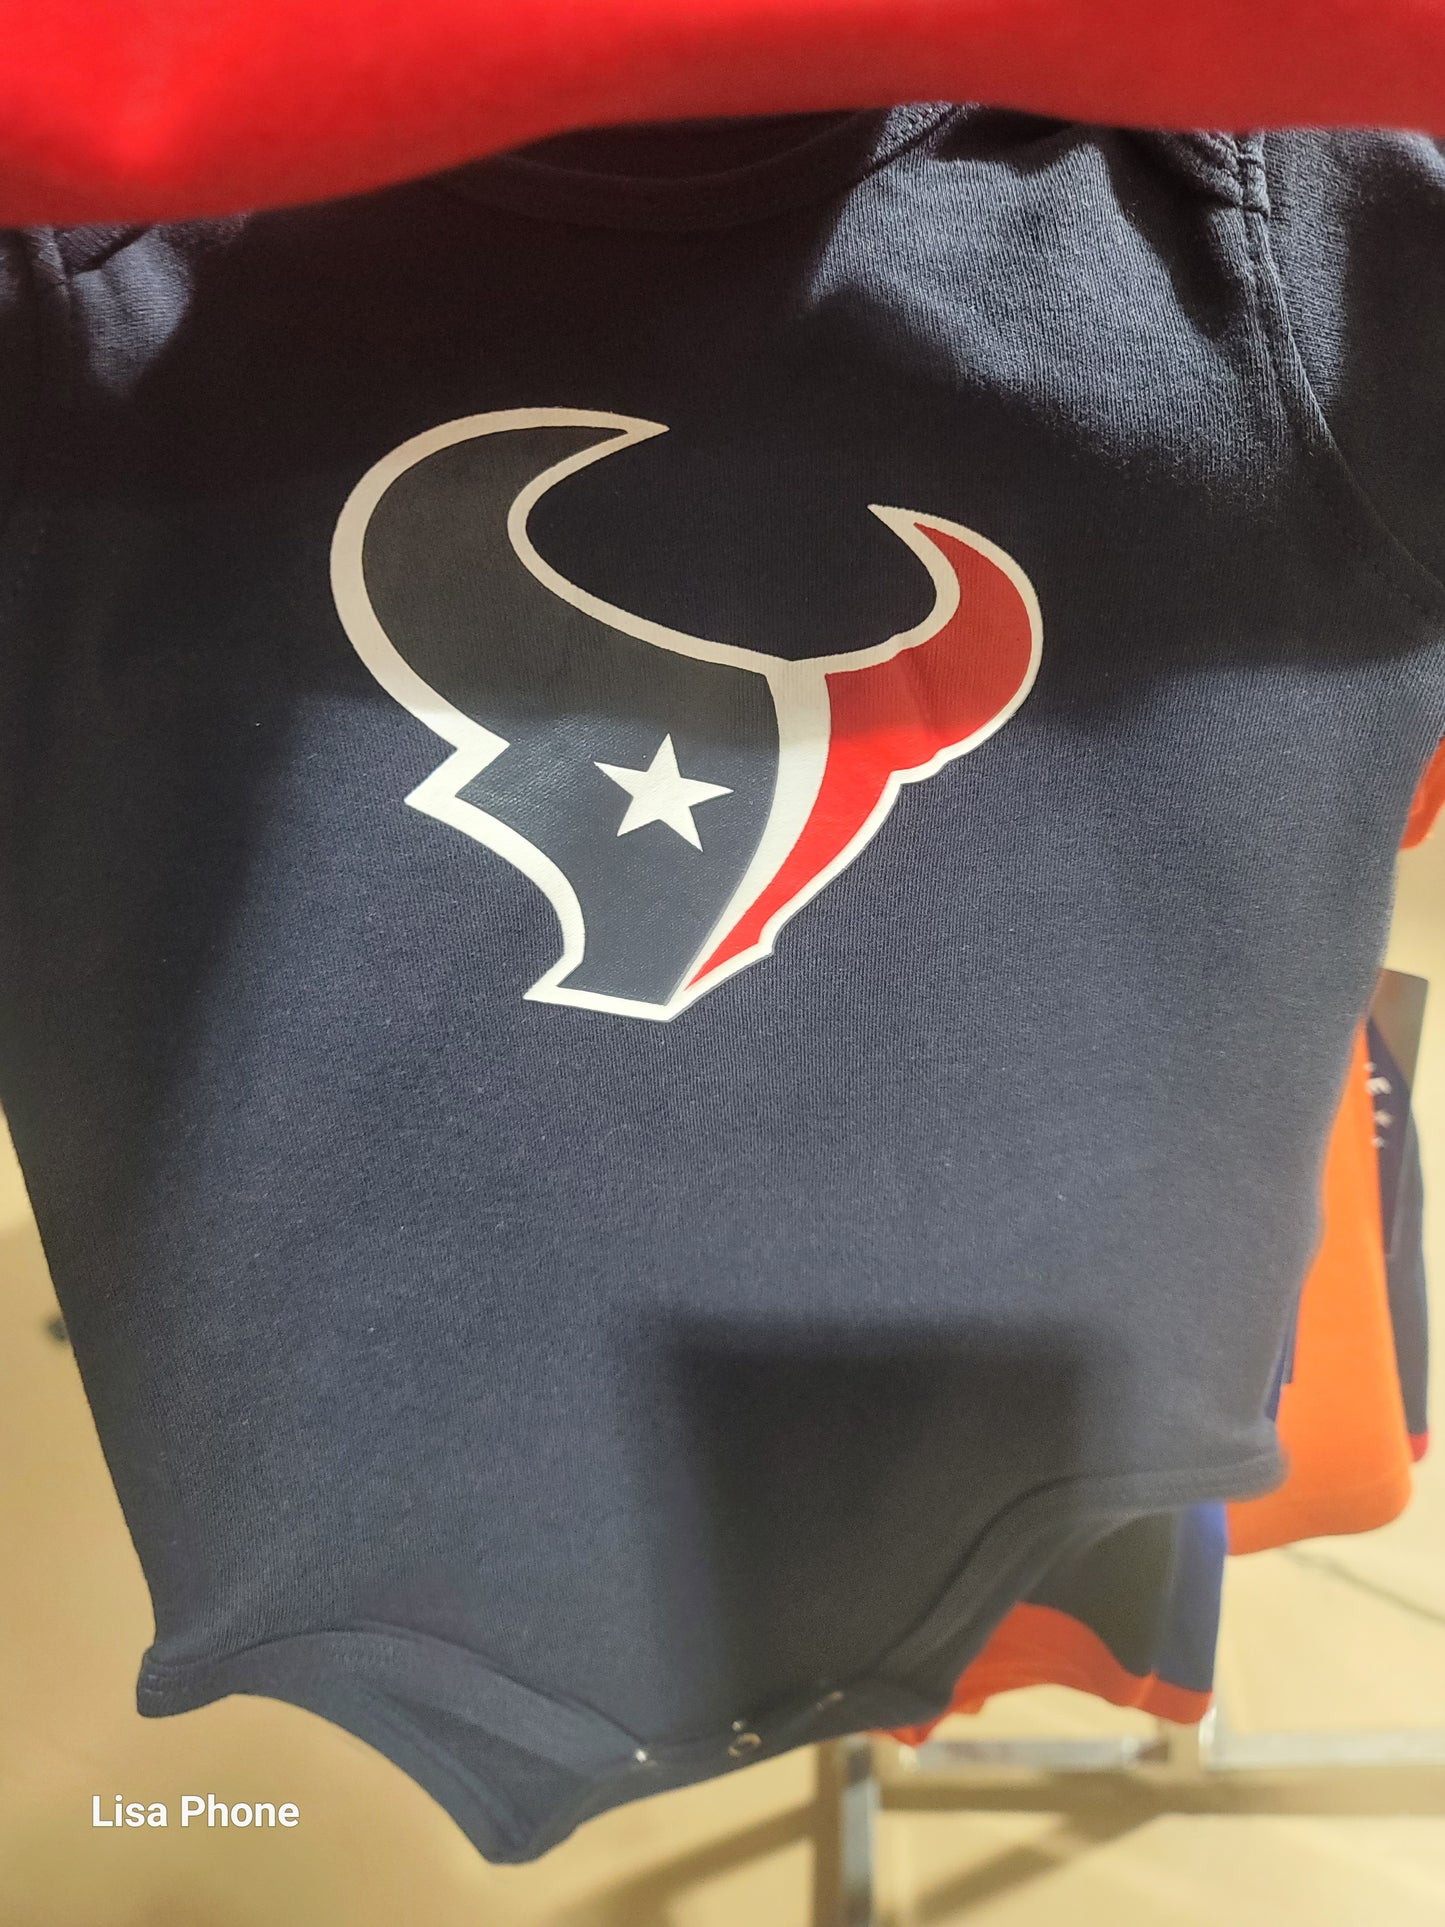 Texans Onses 3 pack